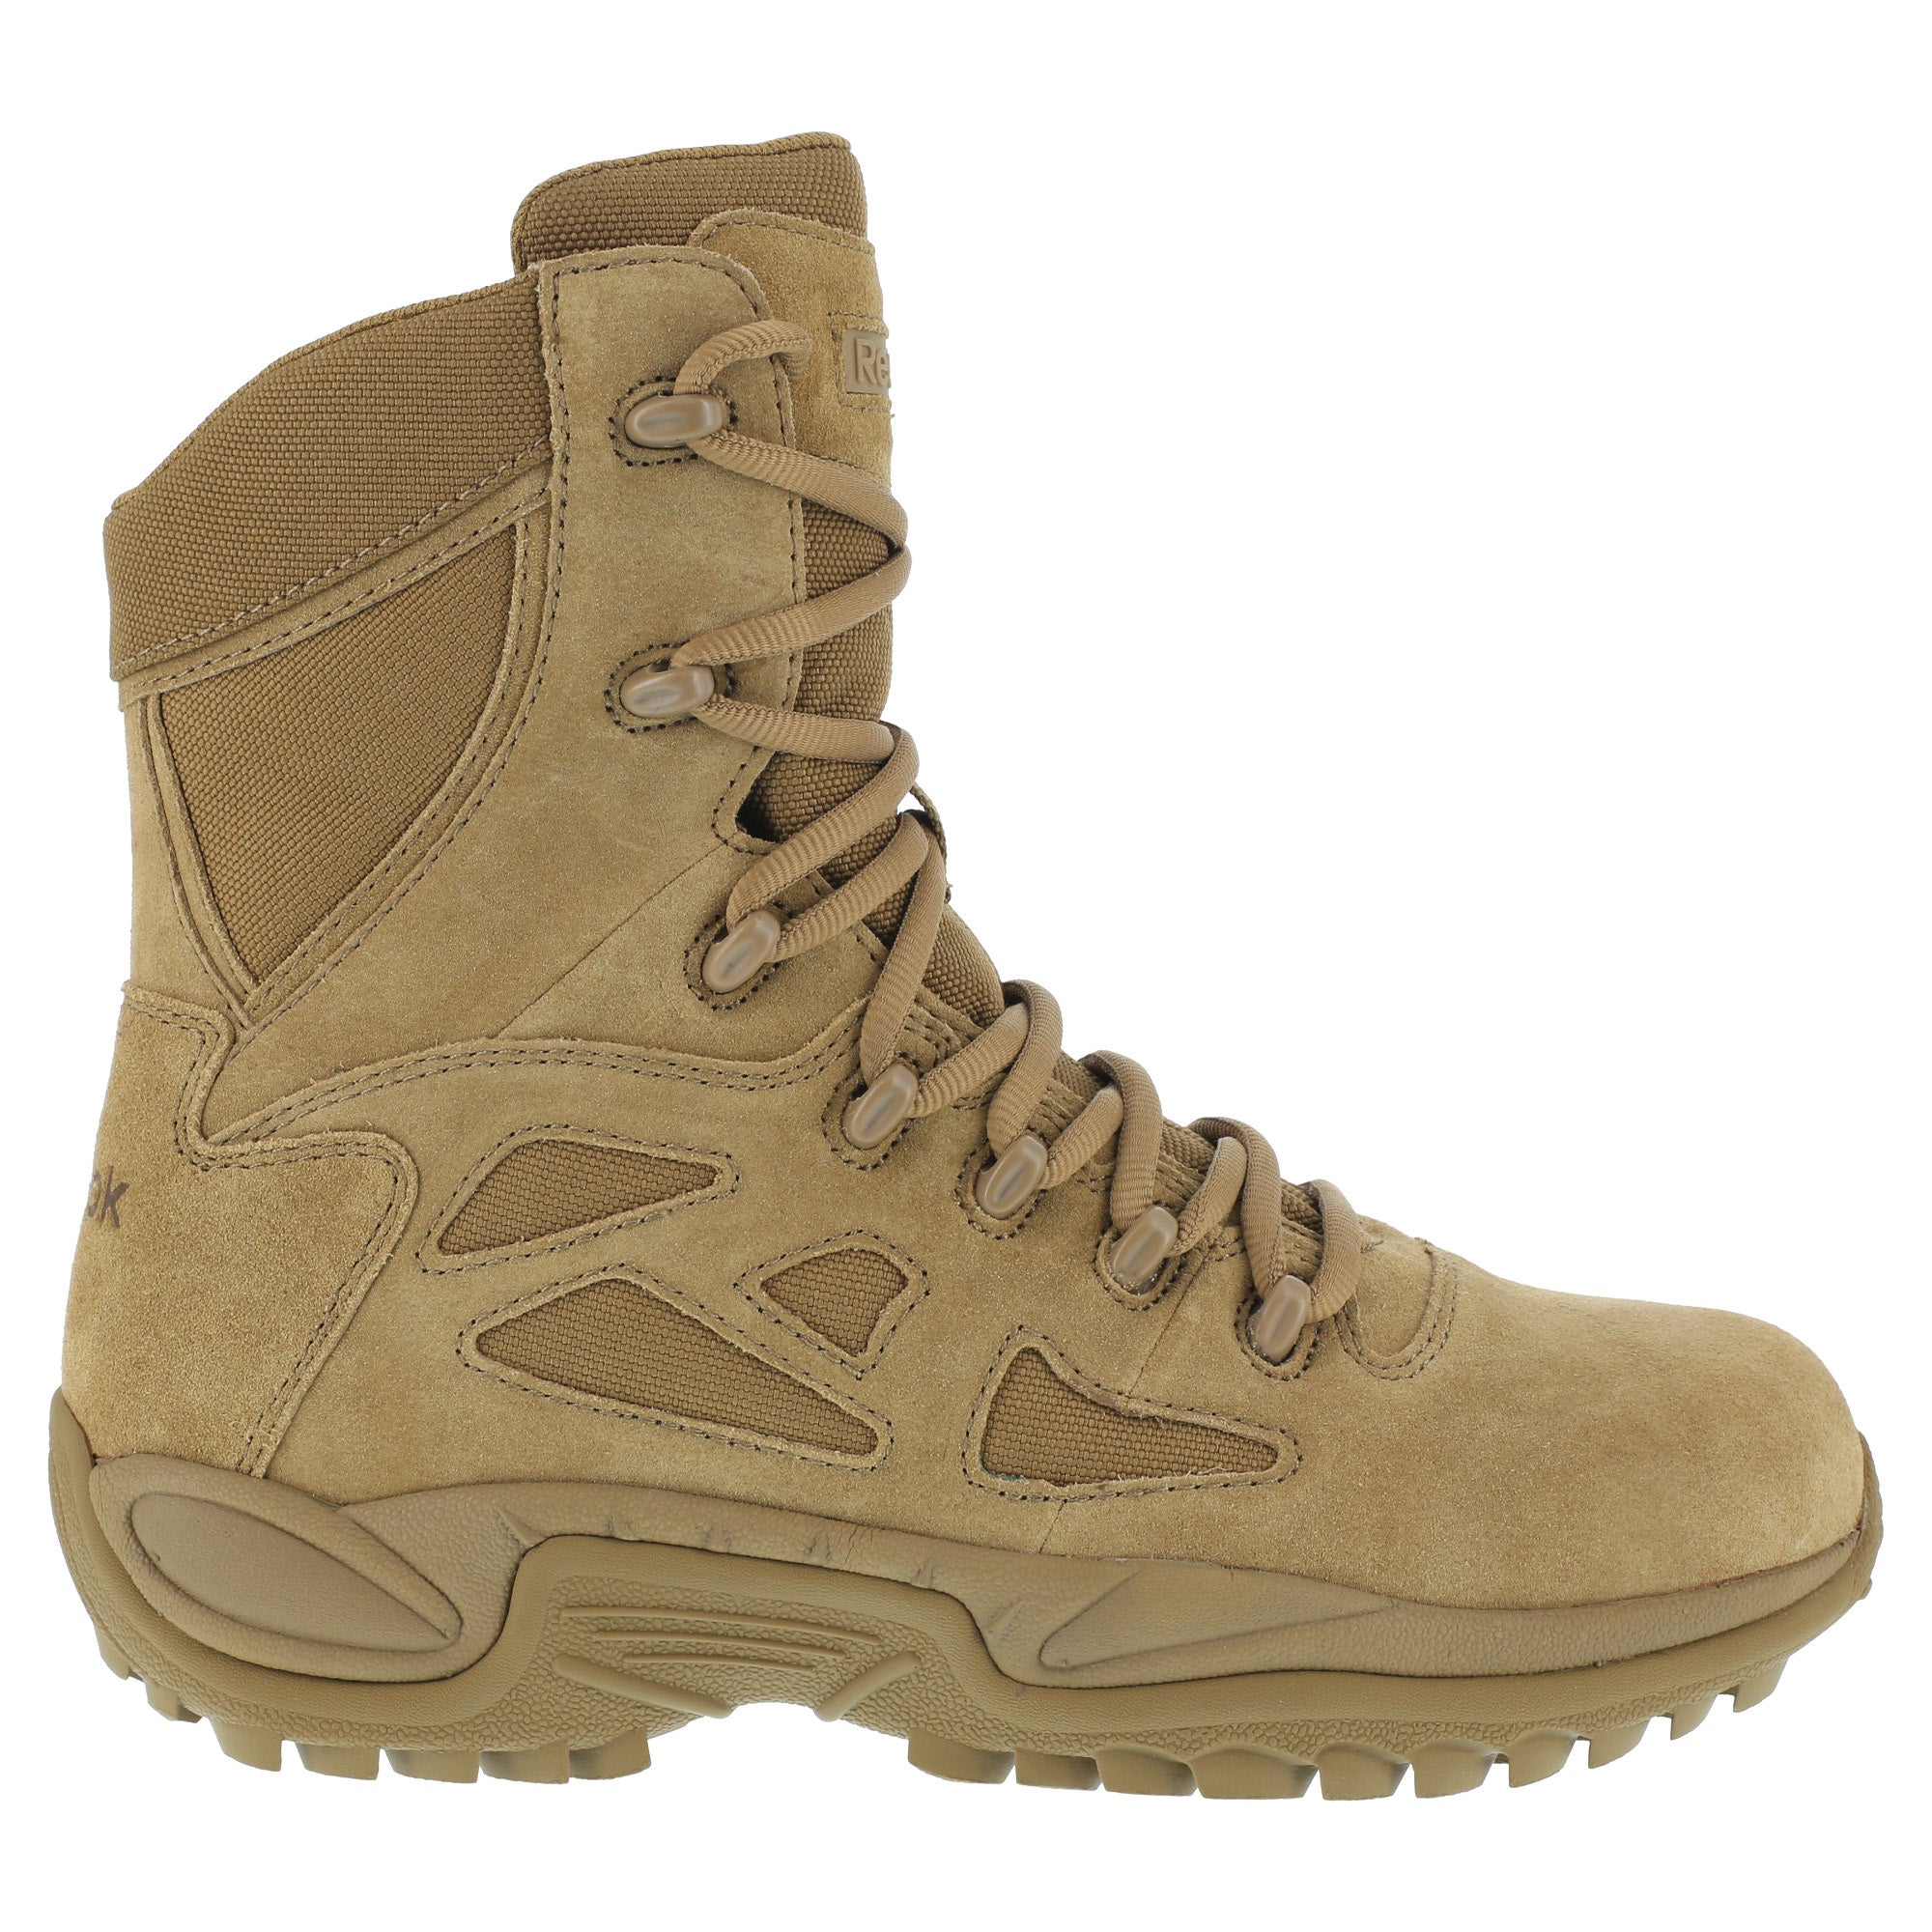 Coyote Leather Military Boots Stealth 8in Response The Western Company